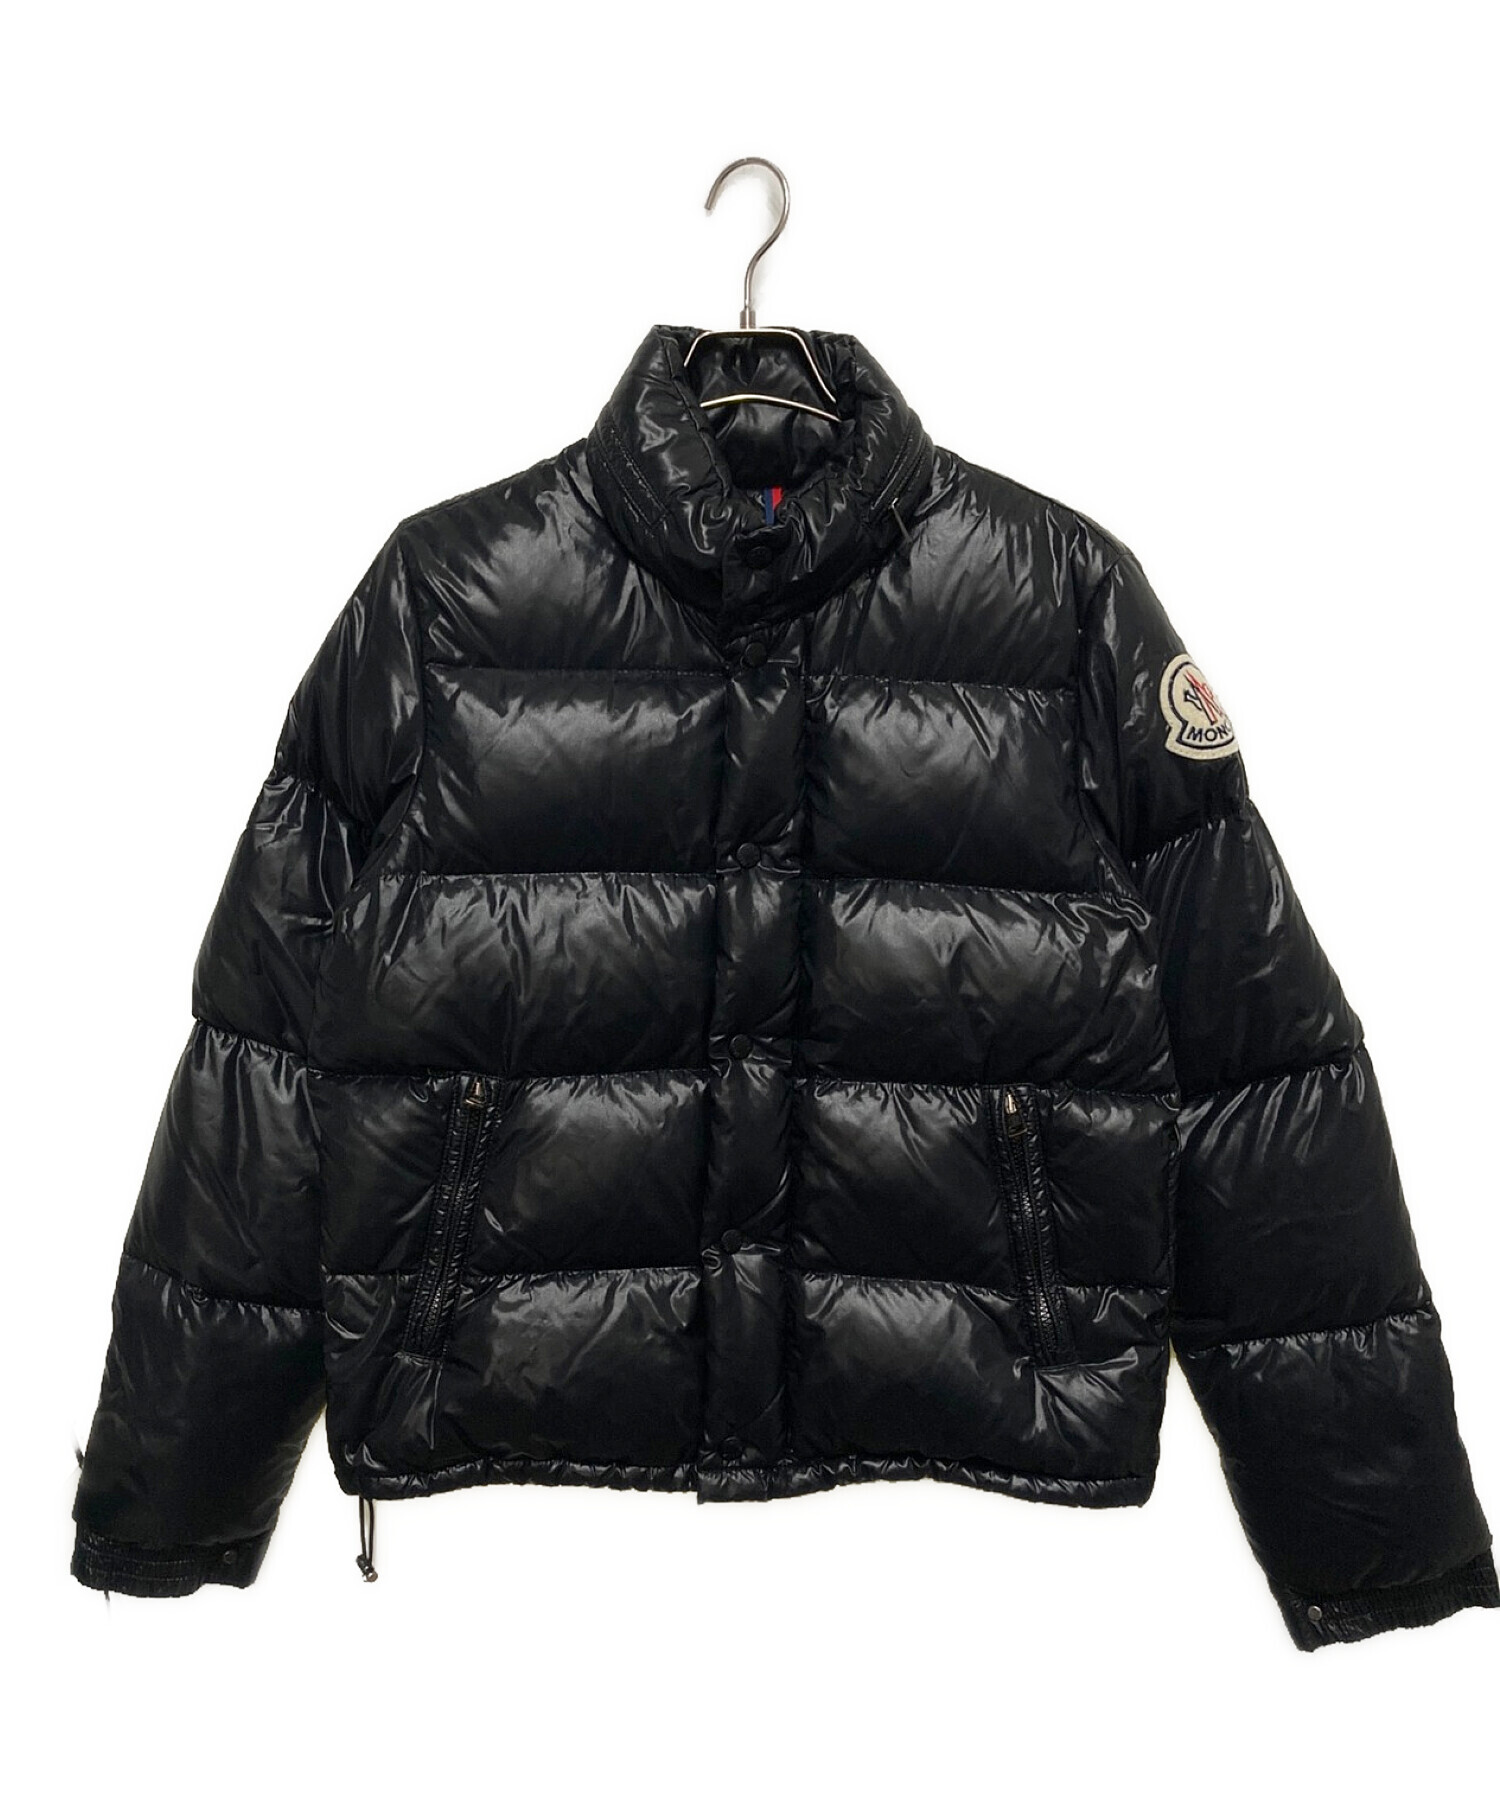 MONCLER EVEREST モンクレール エベレスト ダウンジャケット 2ダウンジャケット